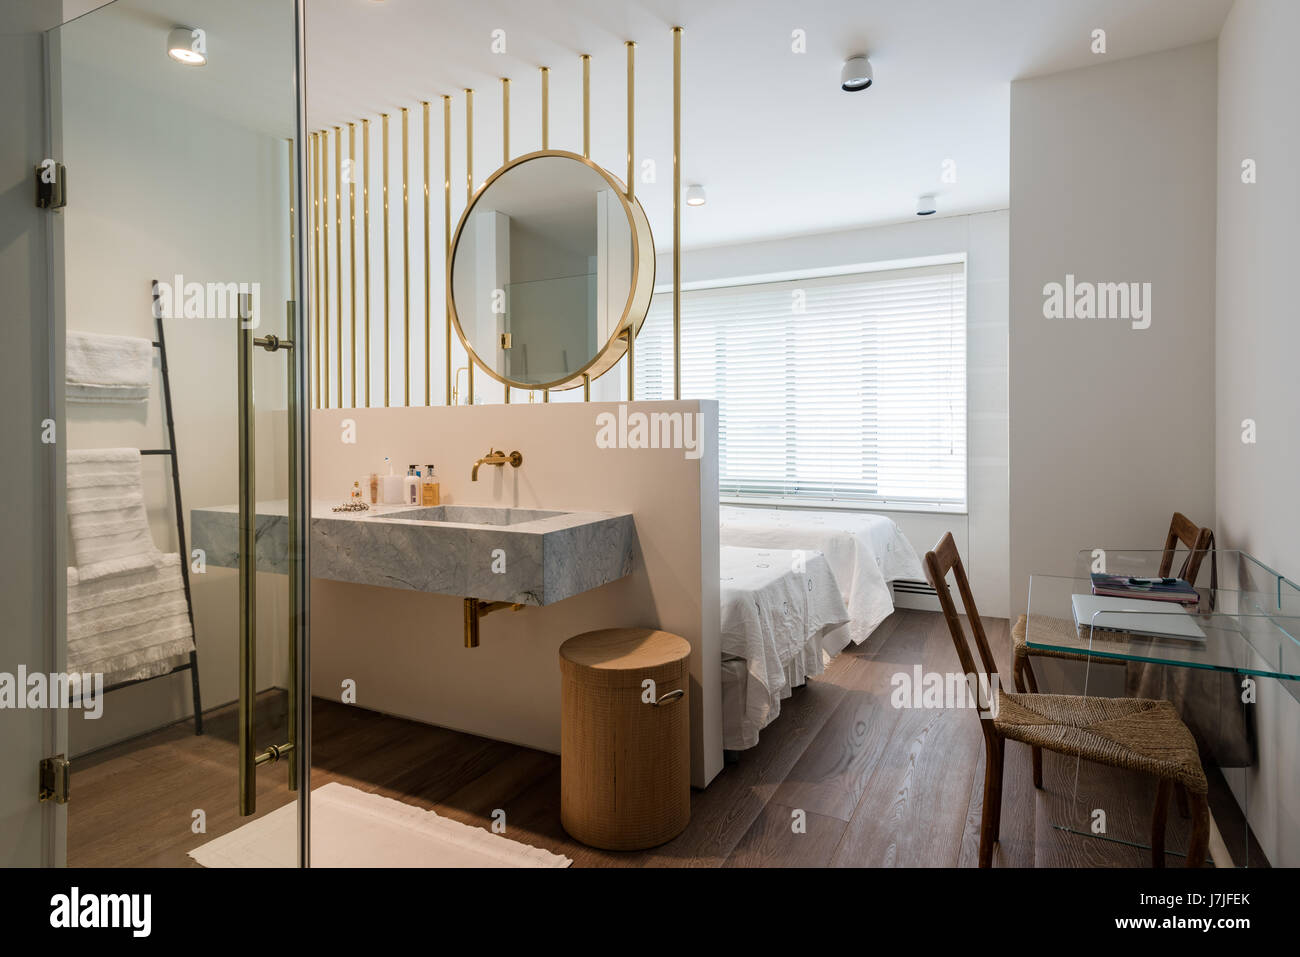 Large brass mirror above ensuite wash stand in twin bedroom Stock Photo